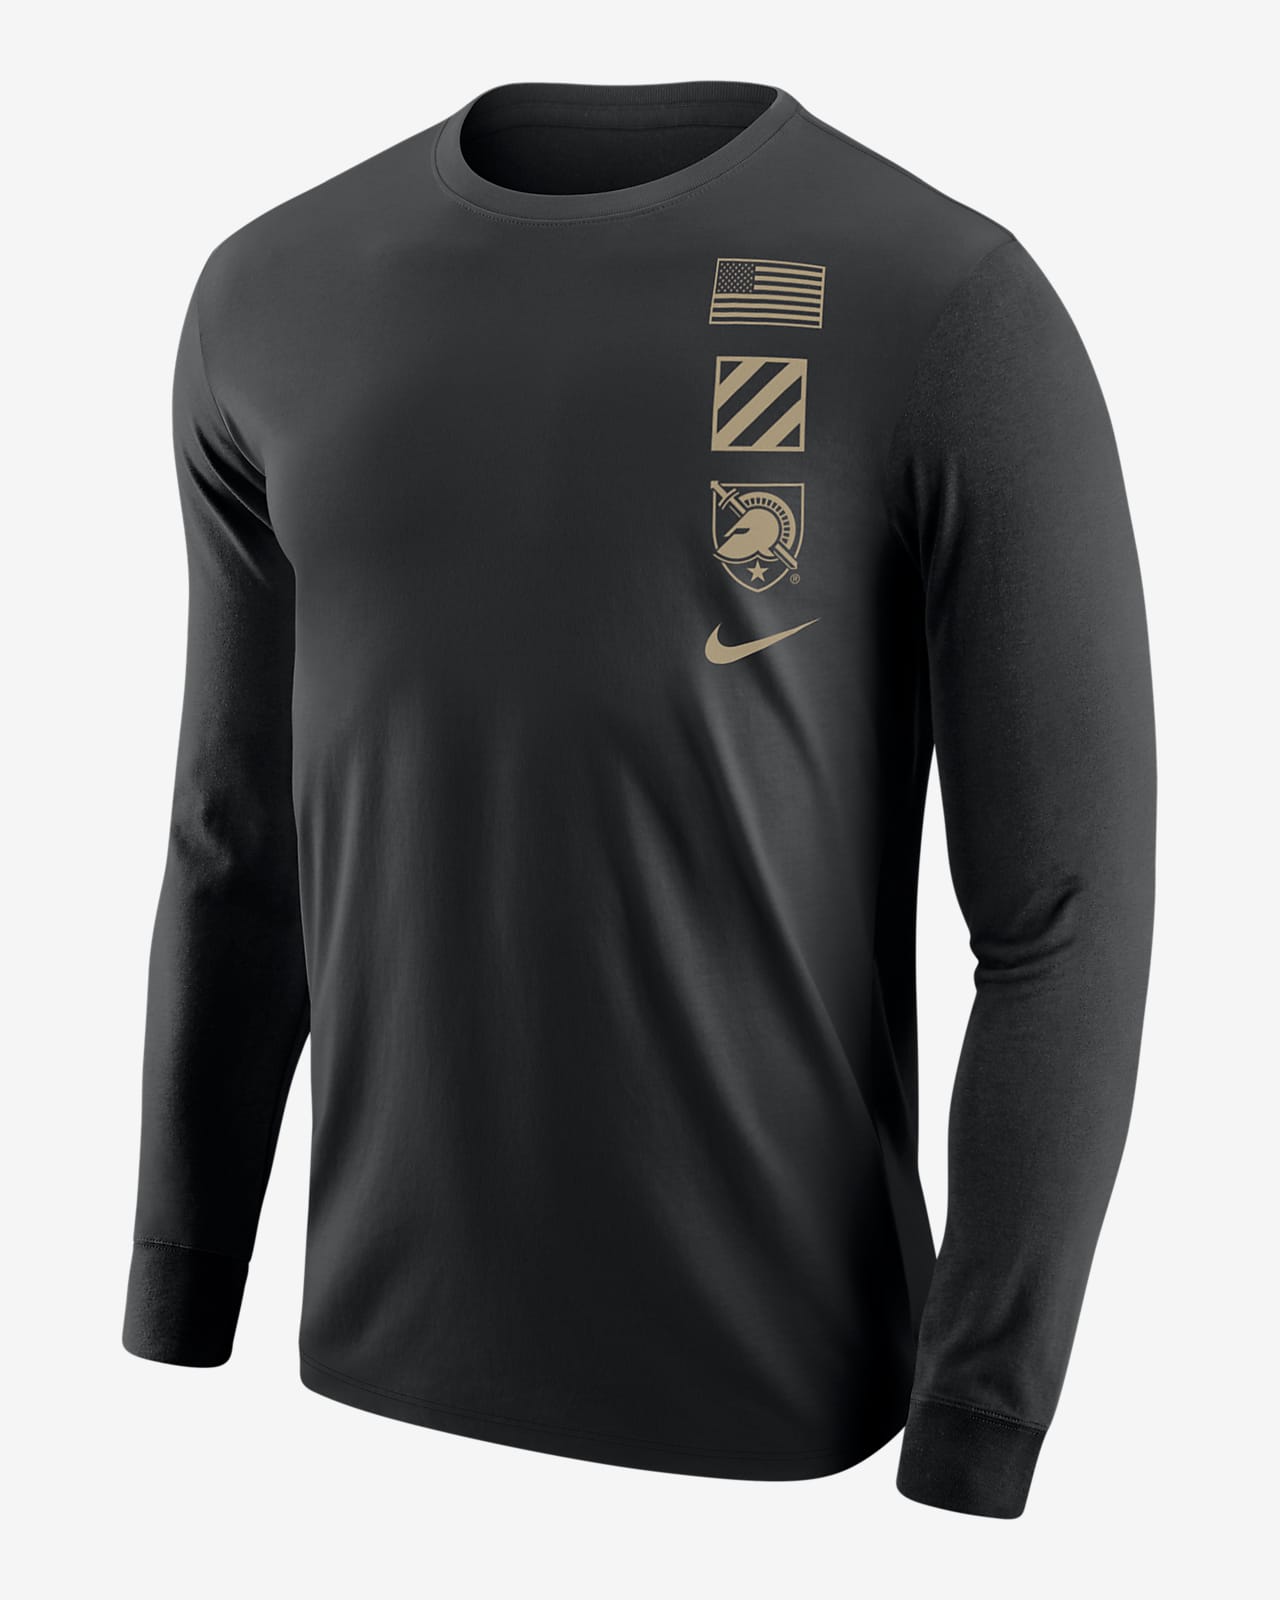 Army Men's Nike College Long-Sleeve T-Shirt